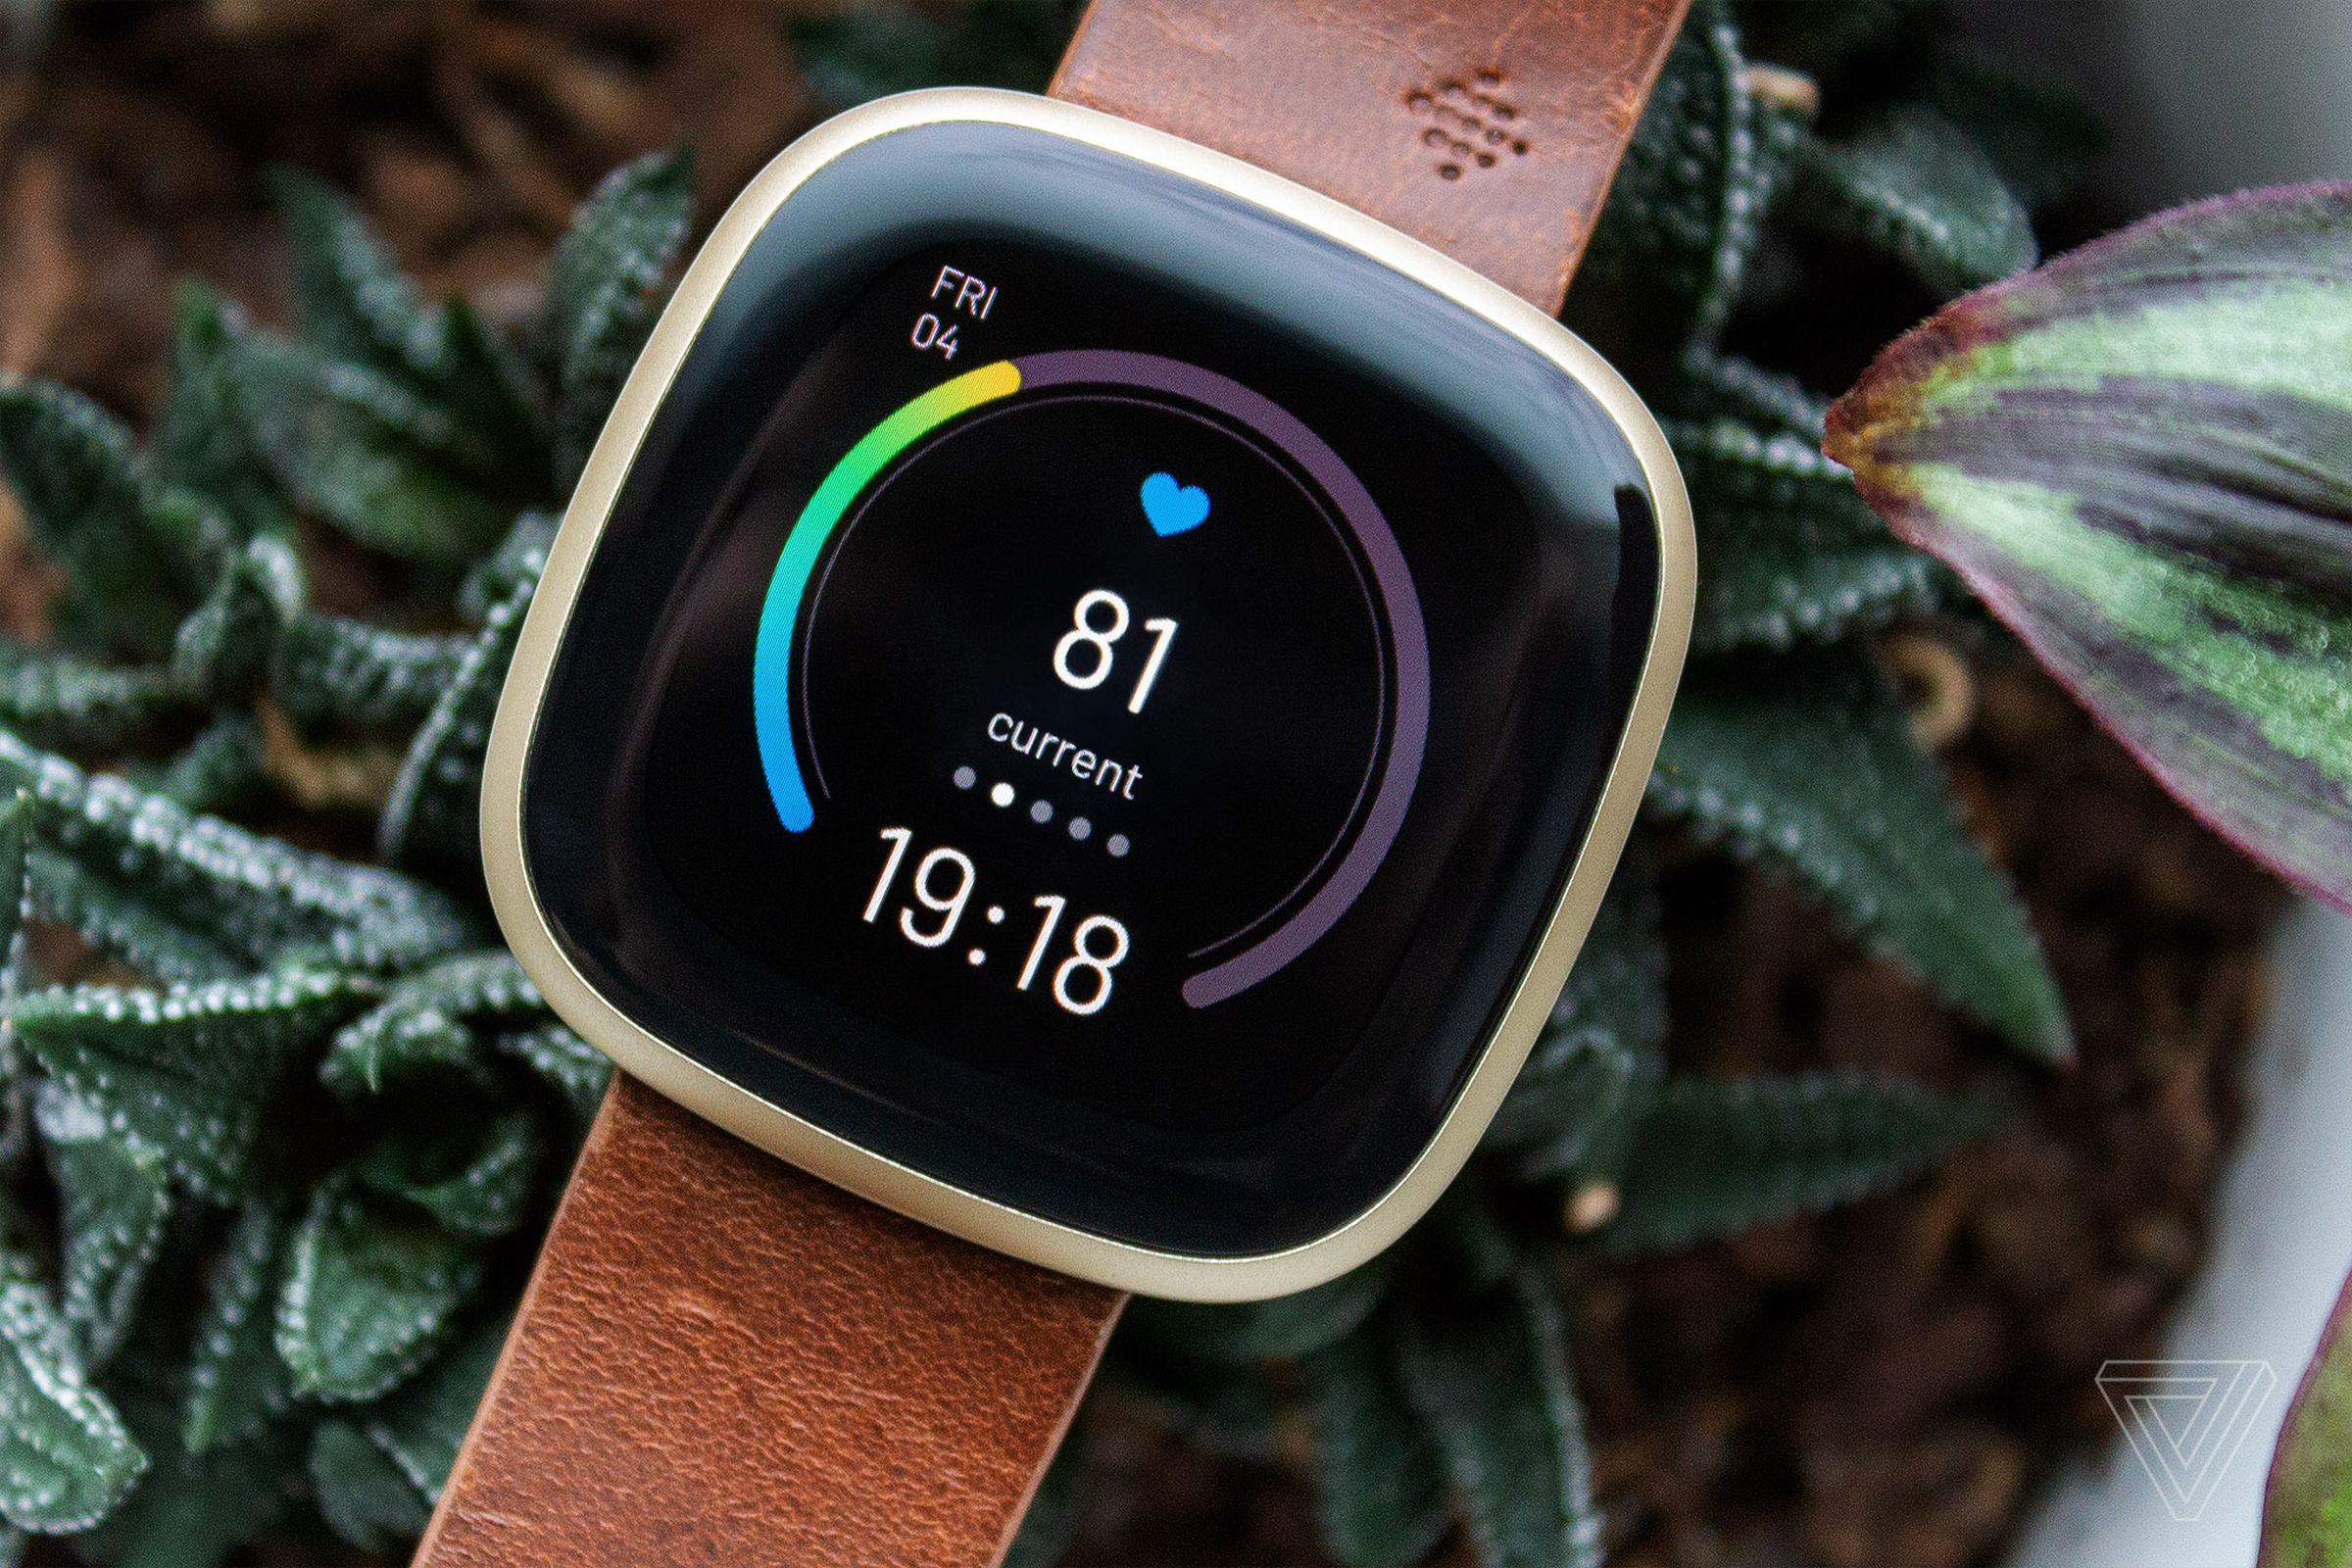 The Fitbit Versa 3 is a versatile tracker with a reasonable mix of features for the price.